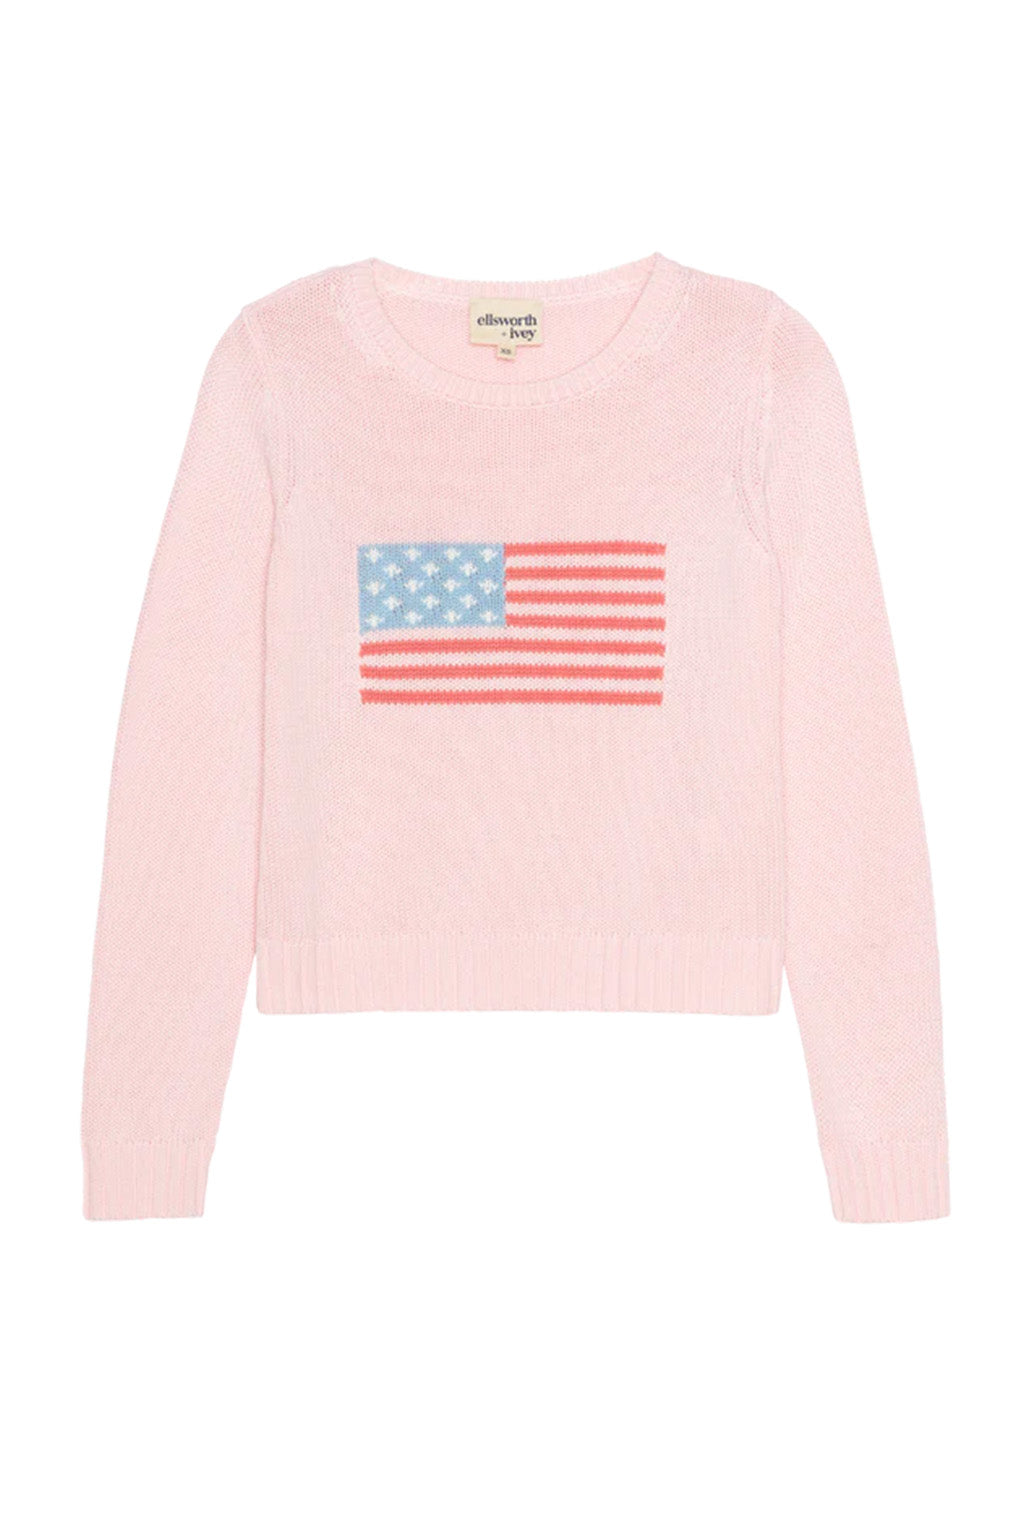 AMERICAN FLAG SWEATER PINK